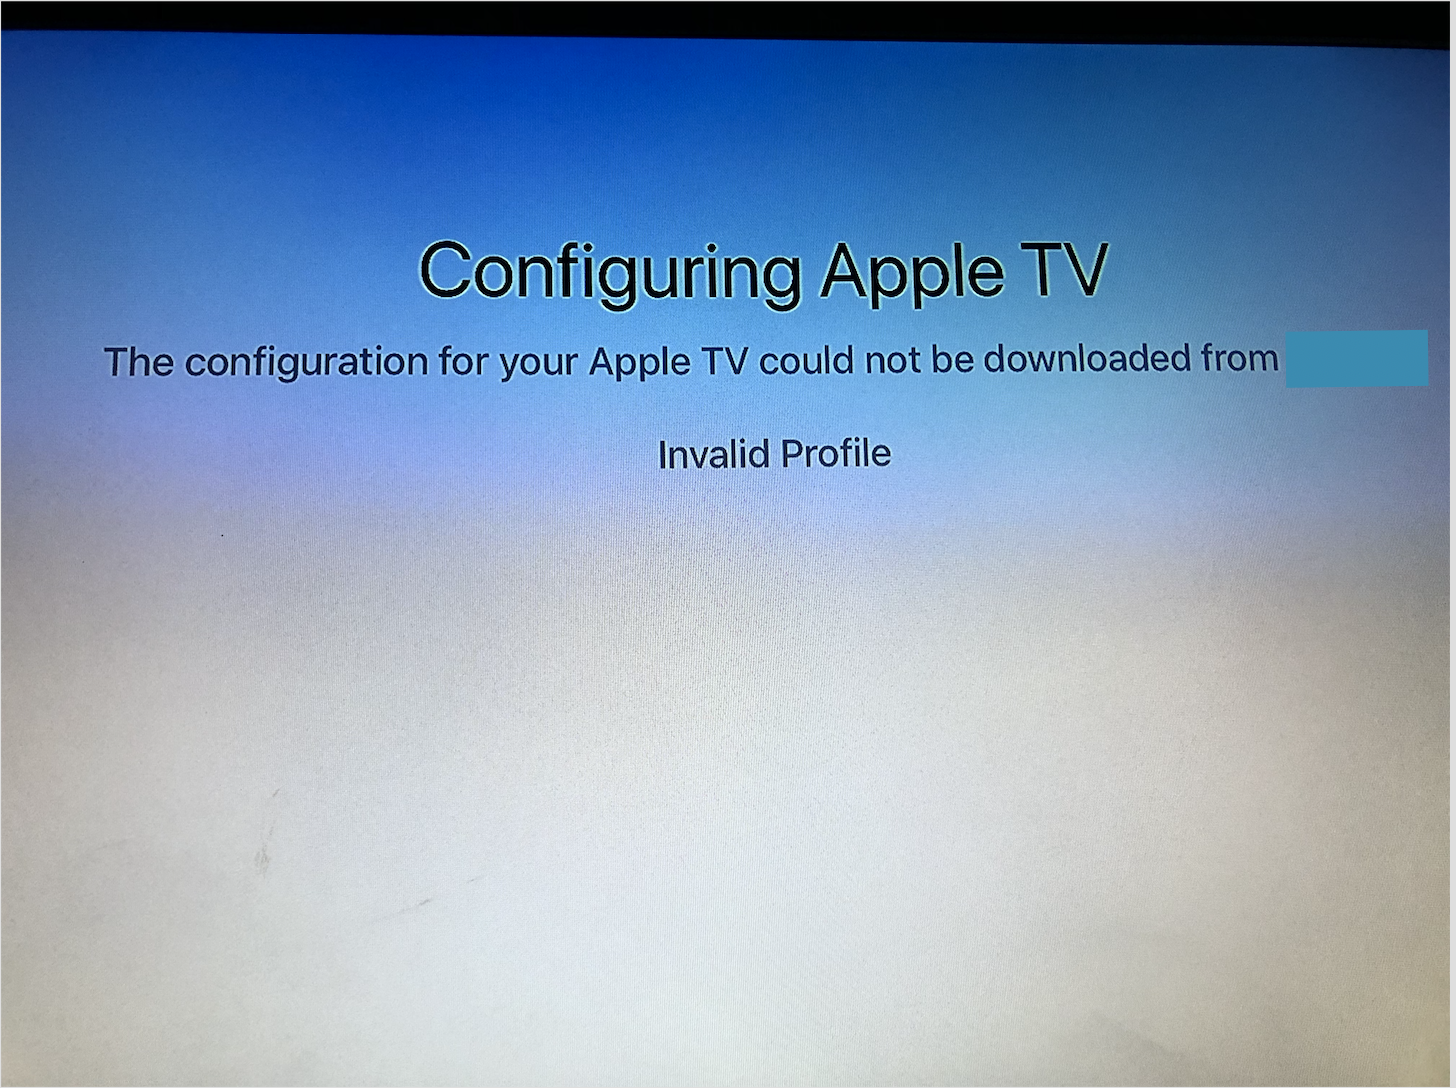 How to enroll an Apple TV into your MDM